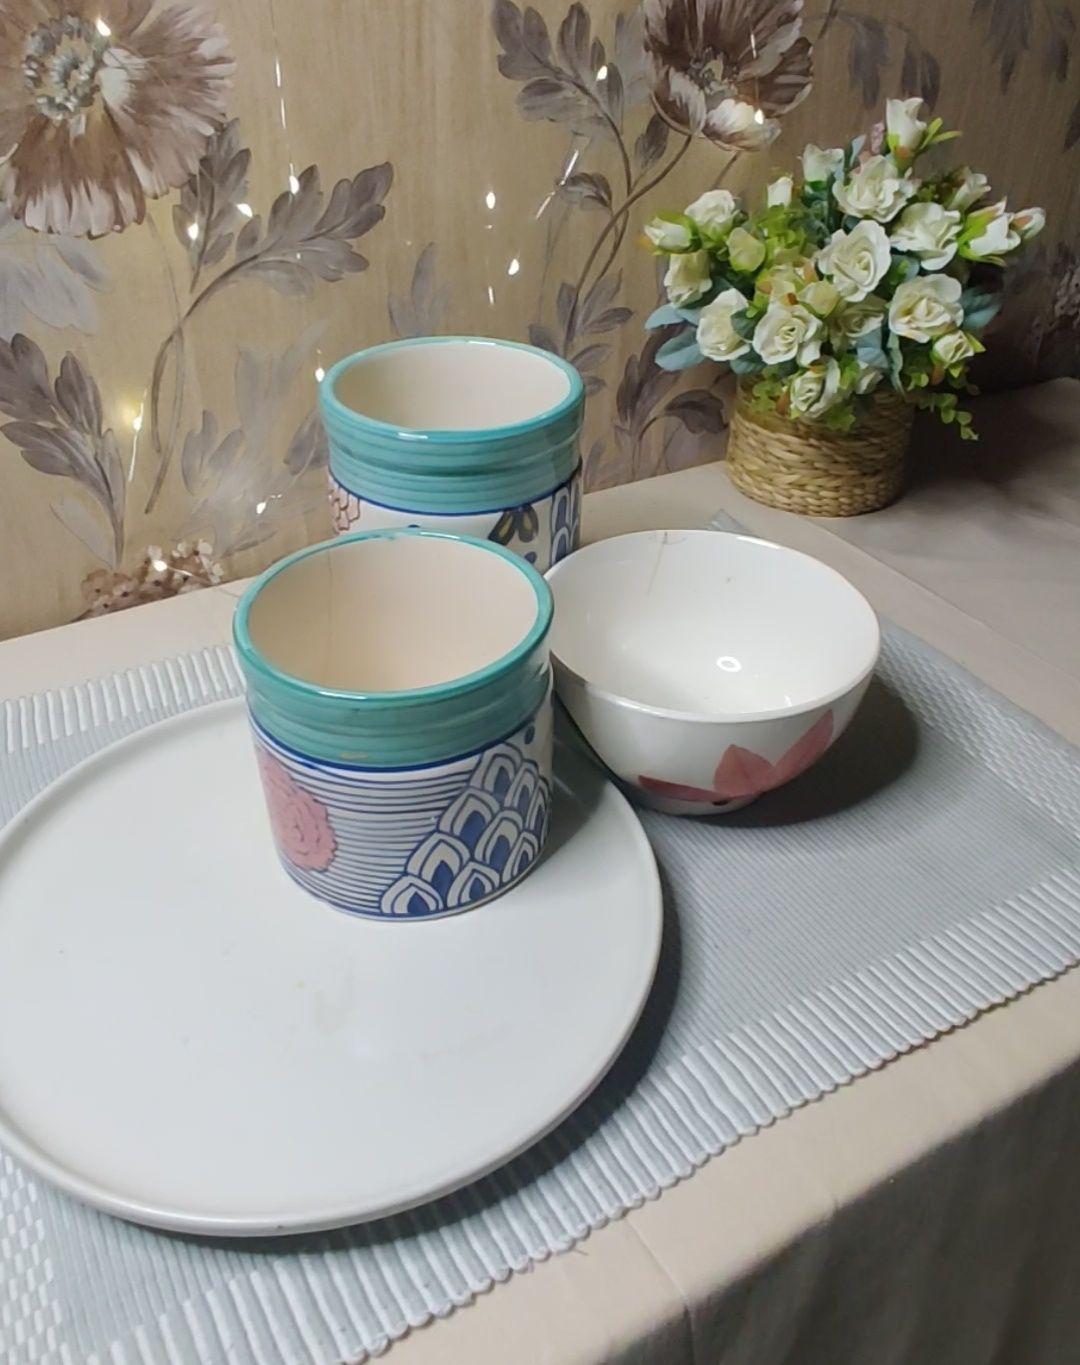 diy room decor-ceramic ware-chipped and cracked bowls-before image